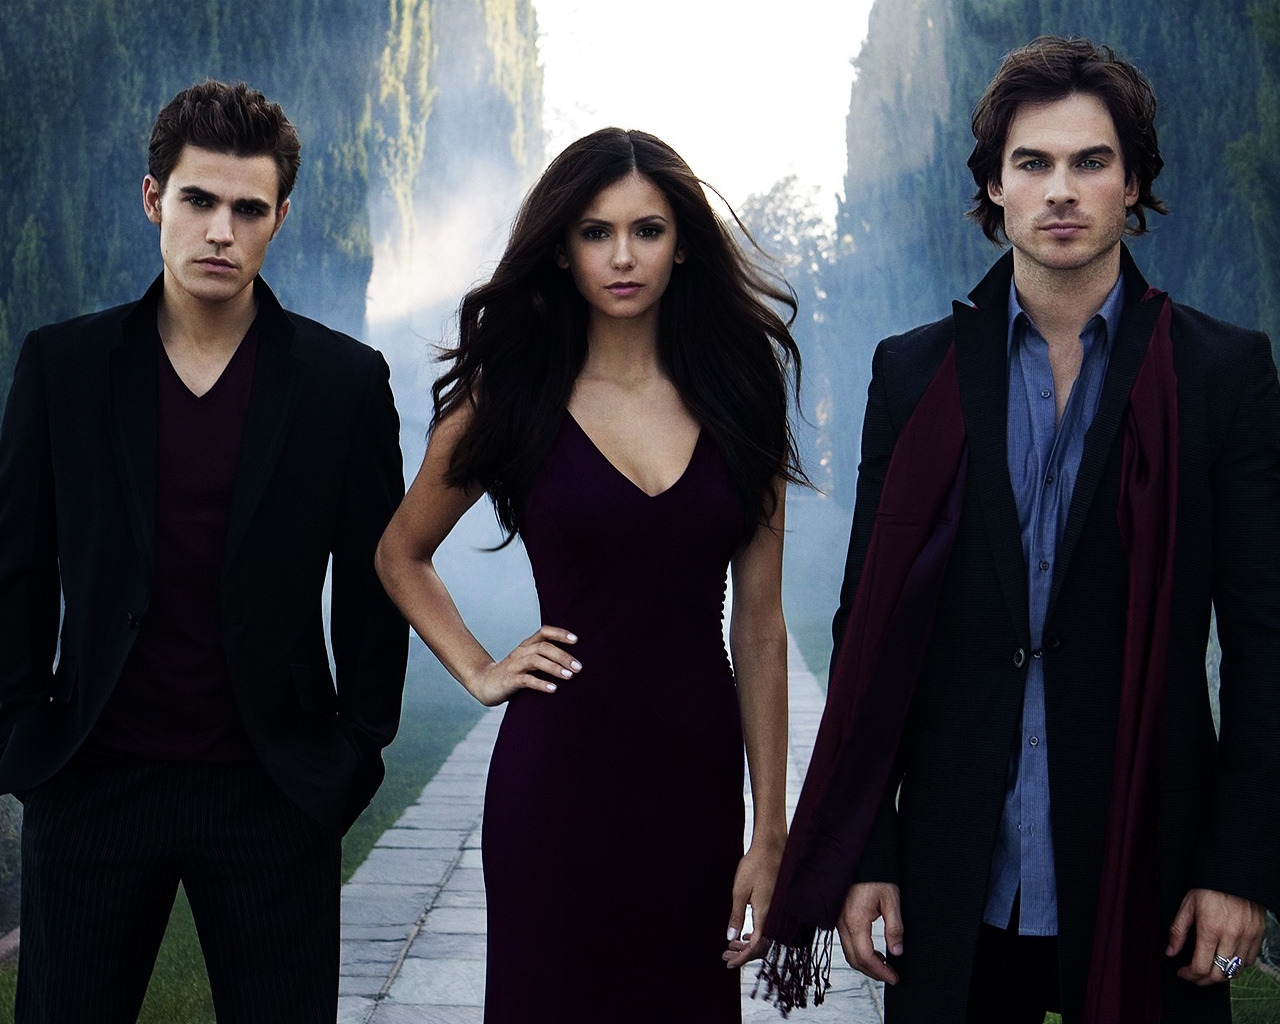 The Vampire Diaries Poster for 1280 x 1024 resolution